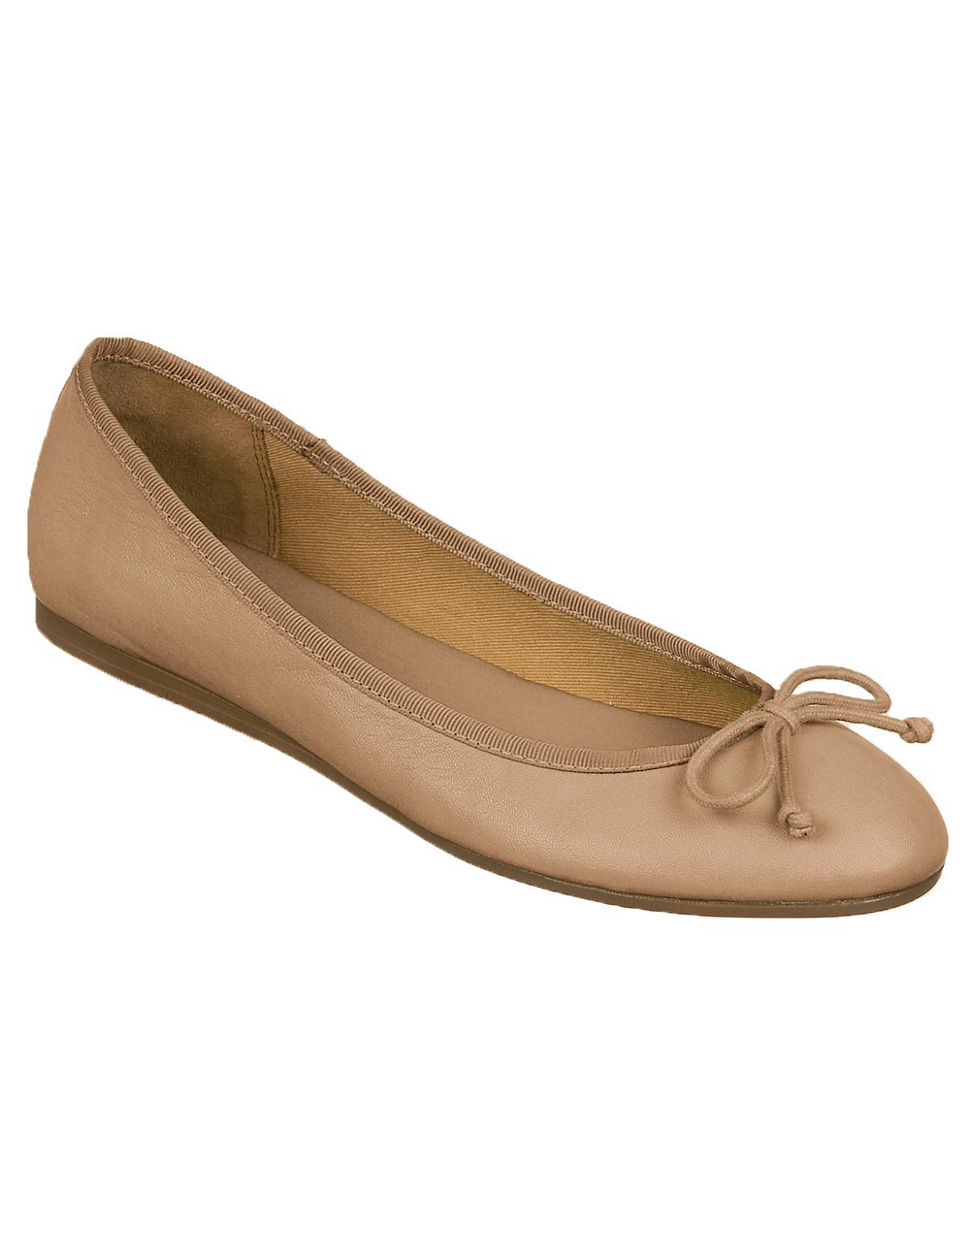 Lyst - Franco Sarto Zapp Leather Ballet Flats With Bow Accent in Brown